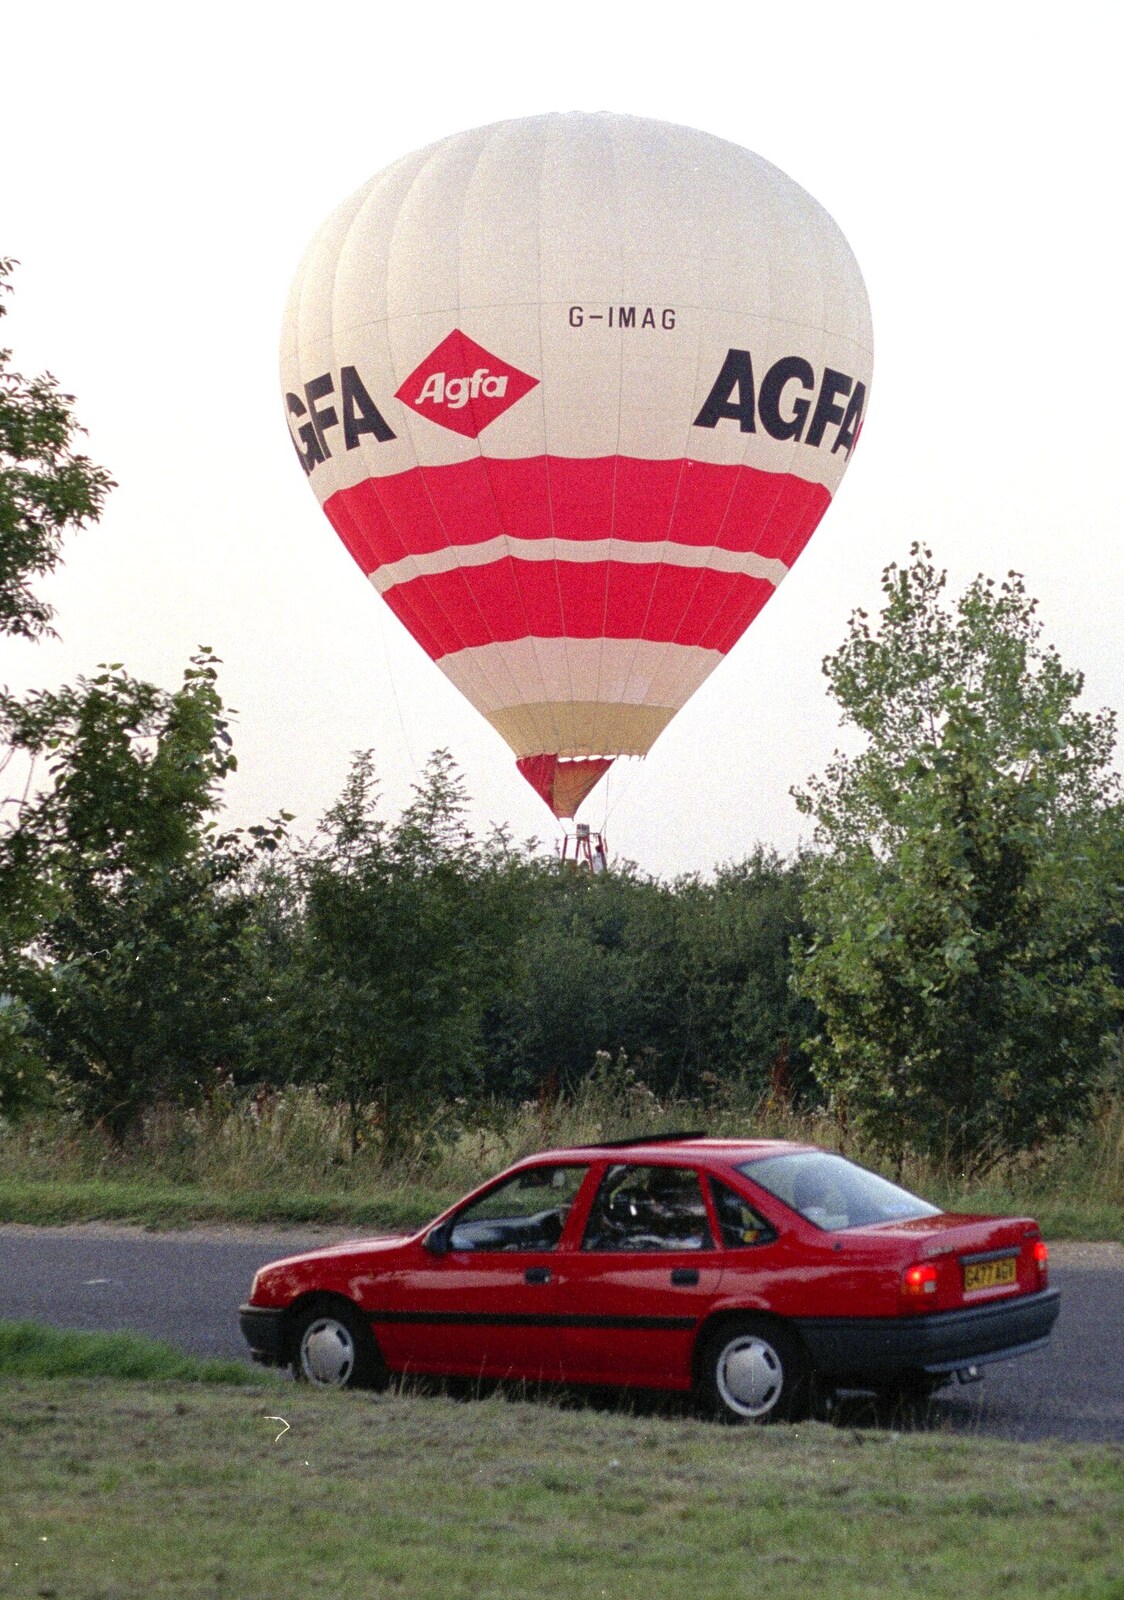 The Eye Show and a Trip to Halifax, Suffolk and South Yorkshire - 28th August 1992: The balloon is nearly in the hedge